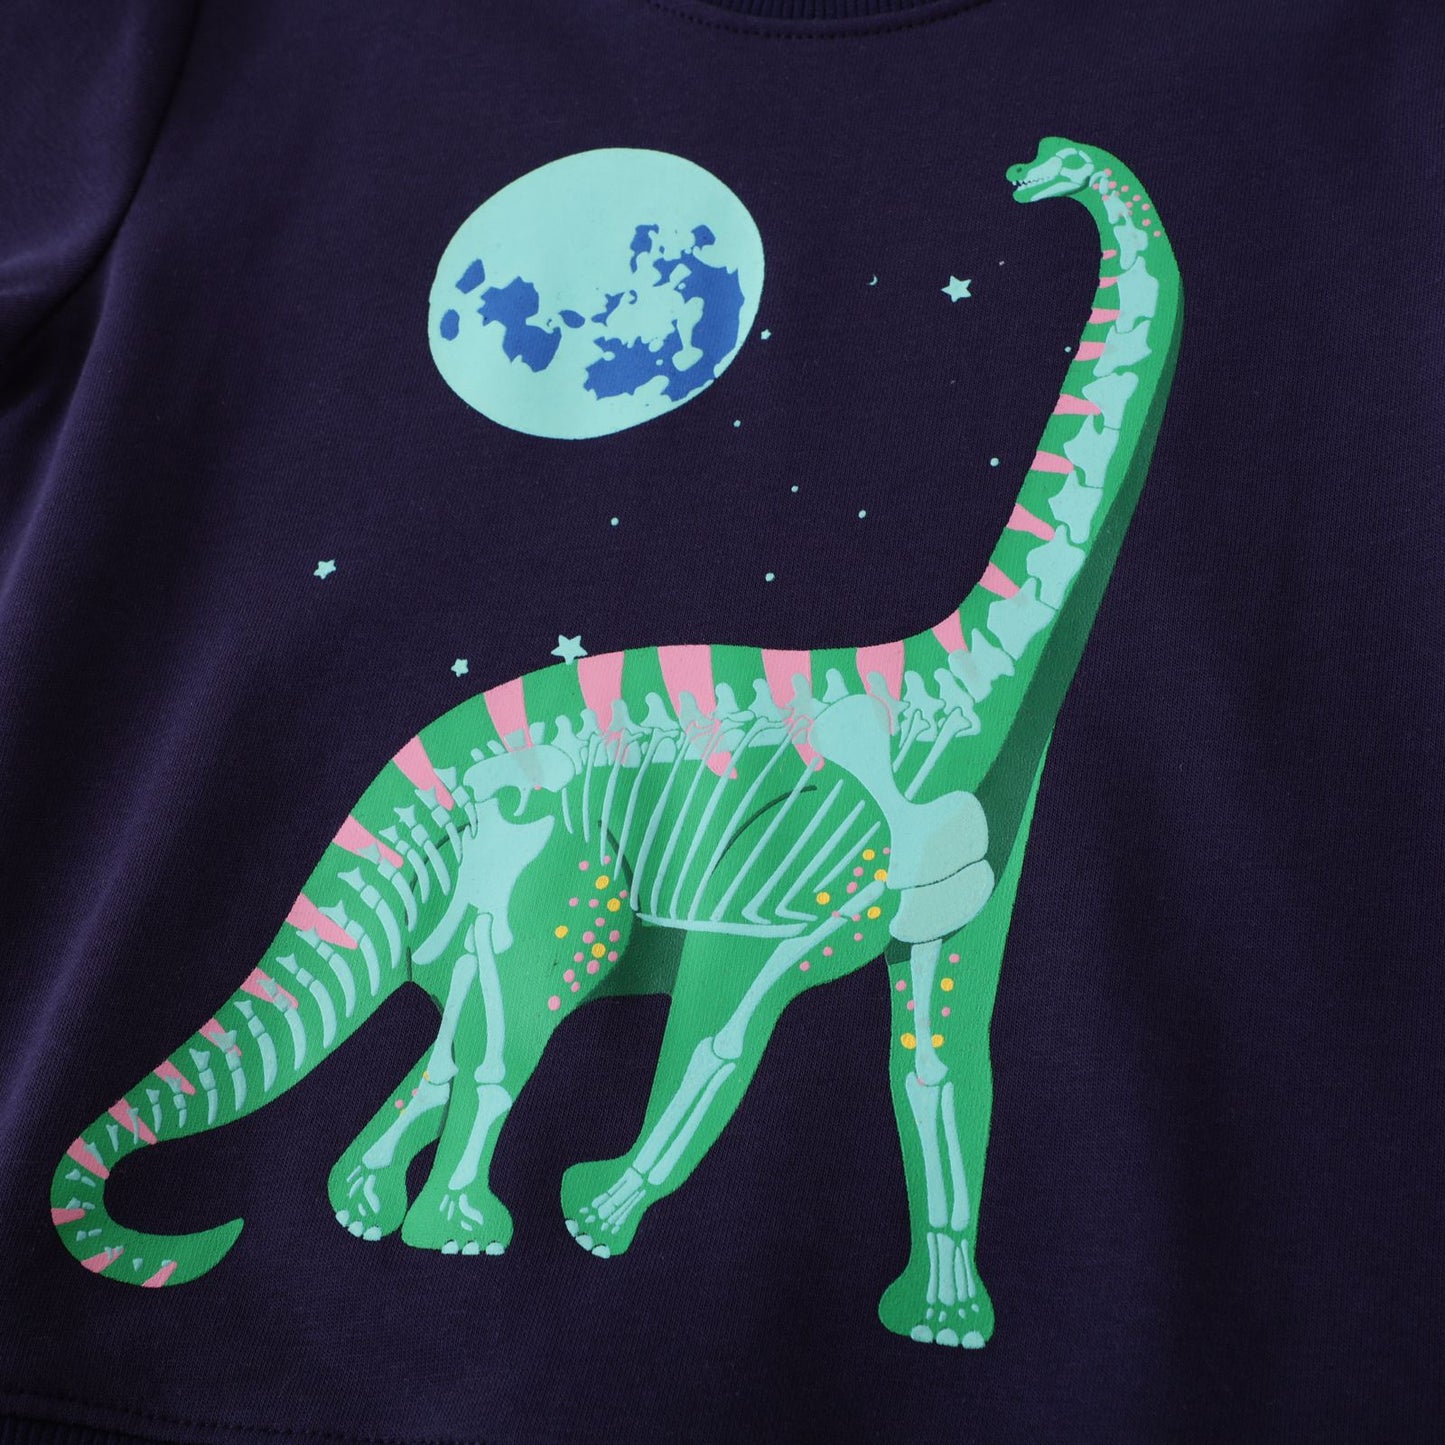 Dinosaur and moon glow in the dark pullover